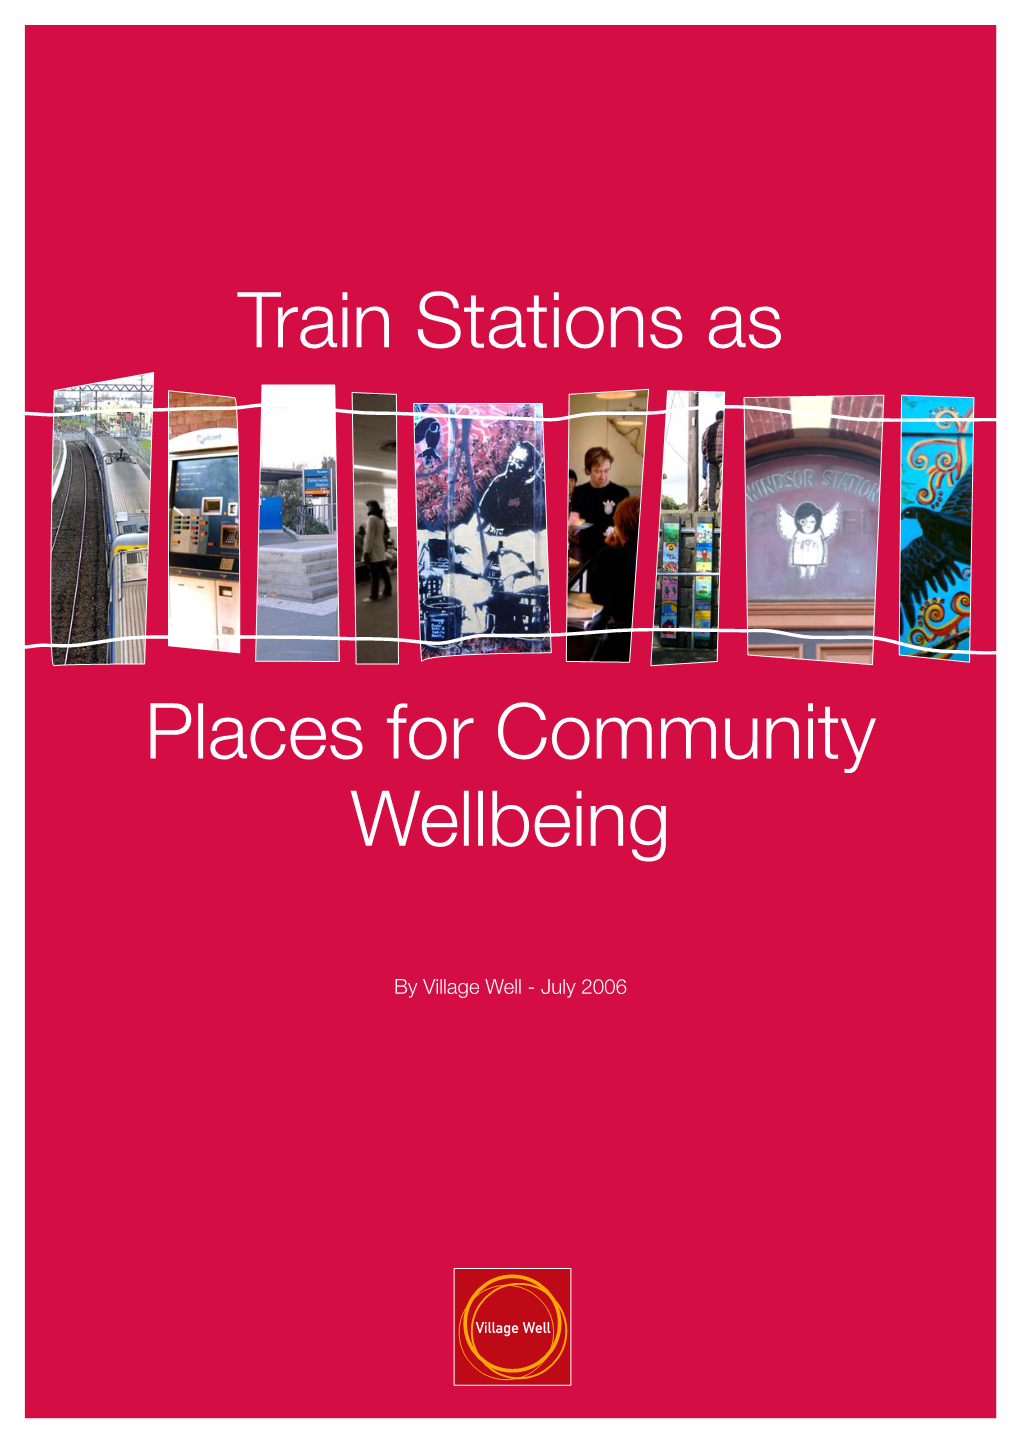 Train Stations As Places for Community Wellbeing